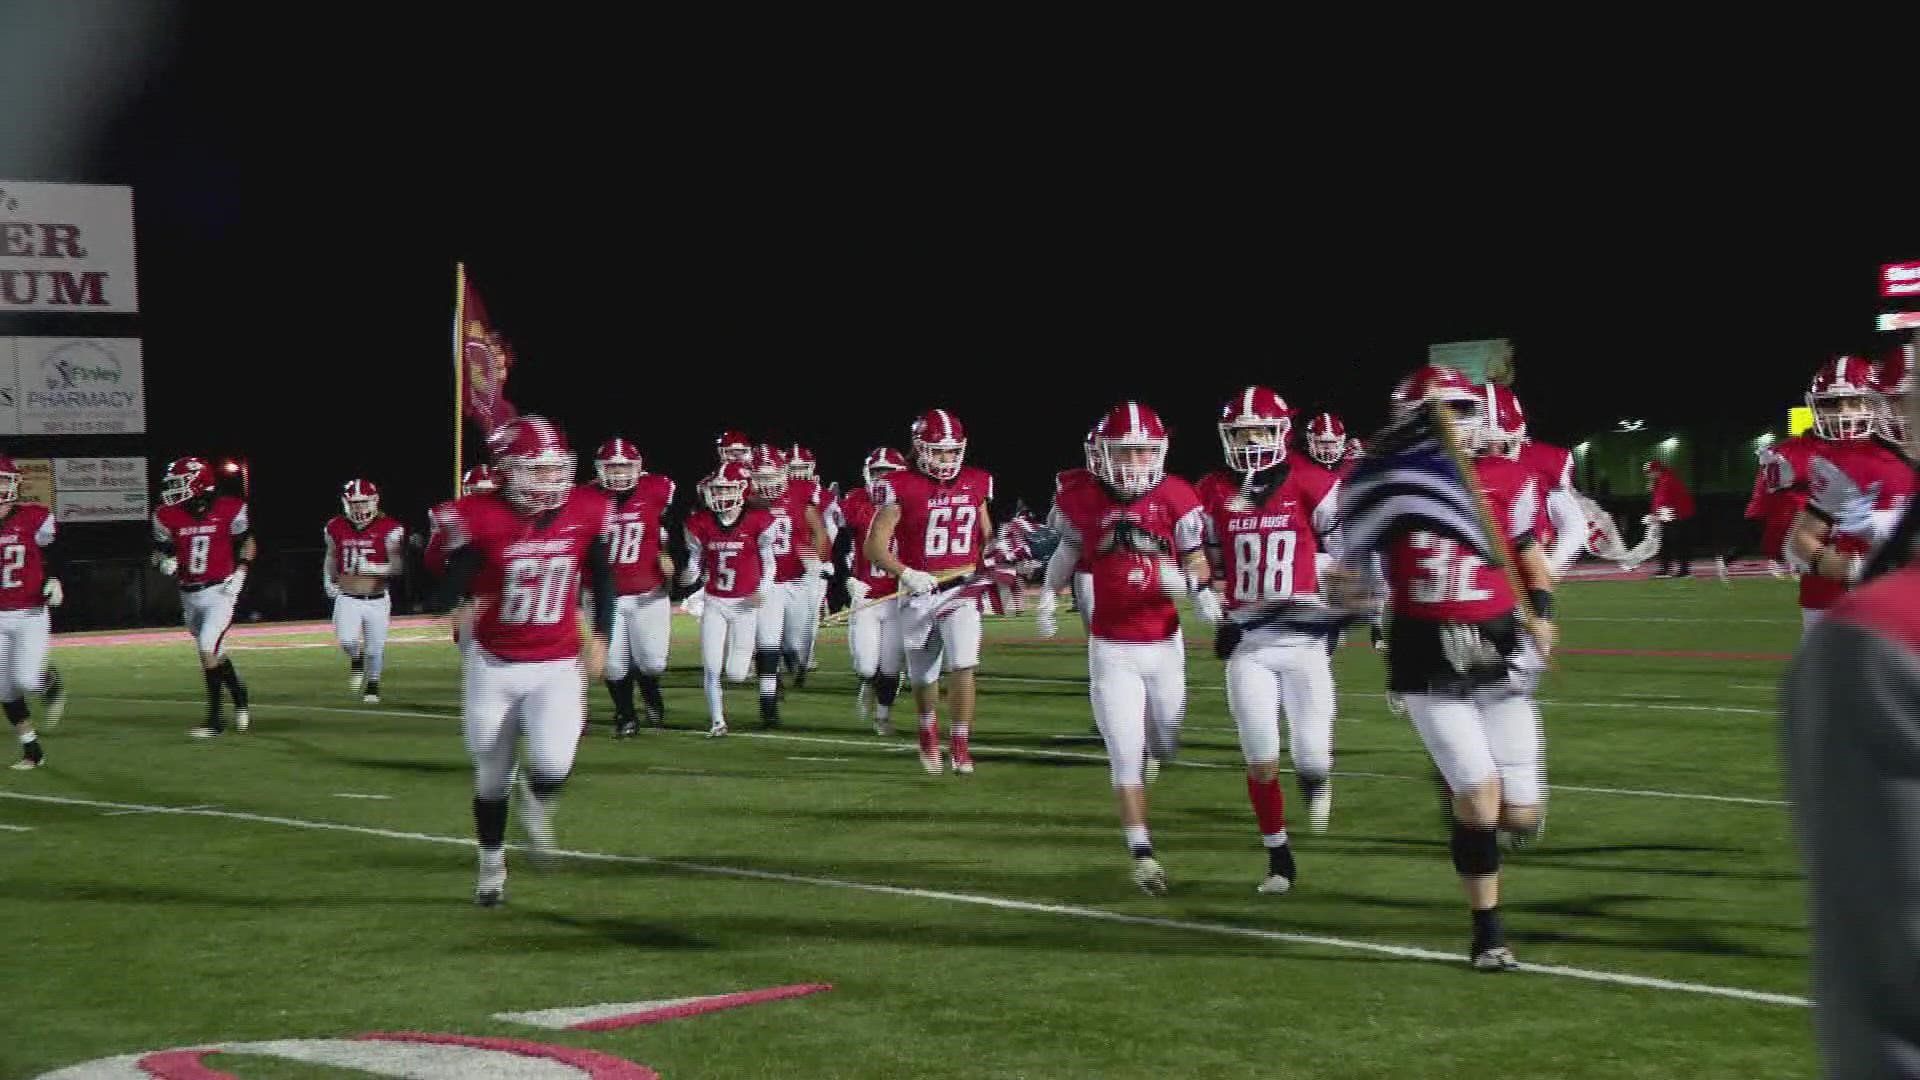 Up next, the Glen Rose Beavers will host Melbourne in the third round of the 3A playoffs